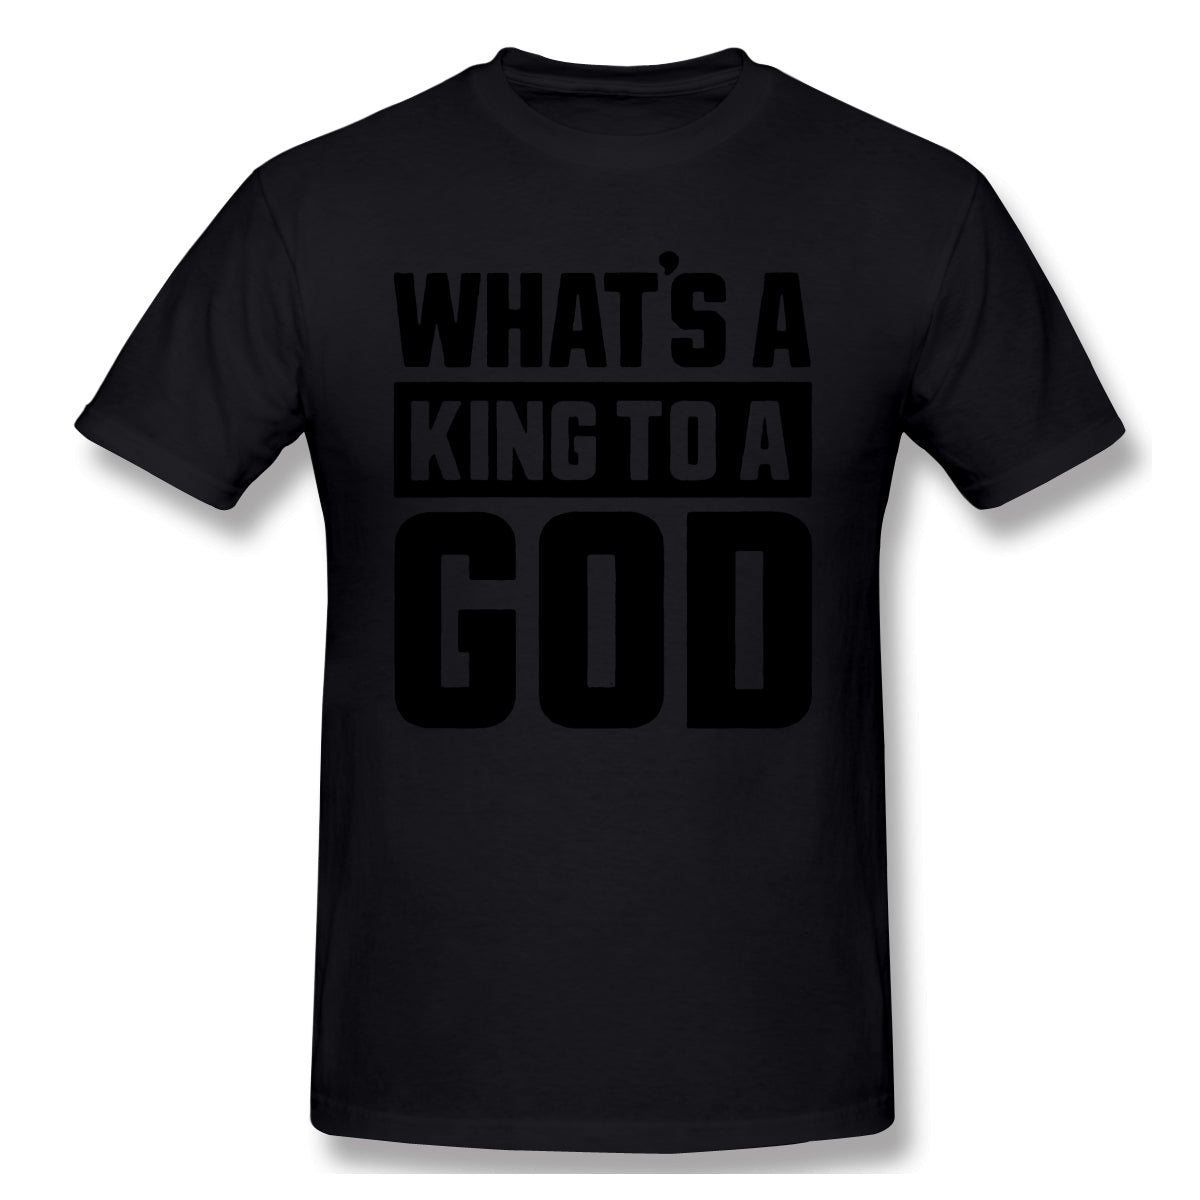 Air Jordan 1 Court Purple 1s Sneaker Tee What's a King To a God t Shirt For Man